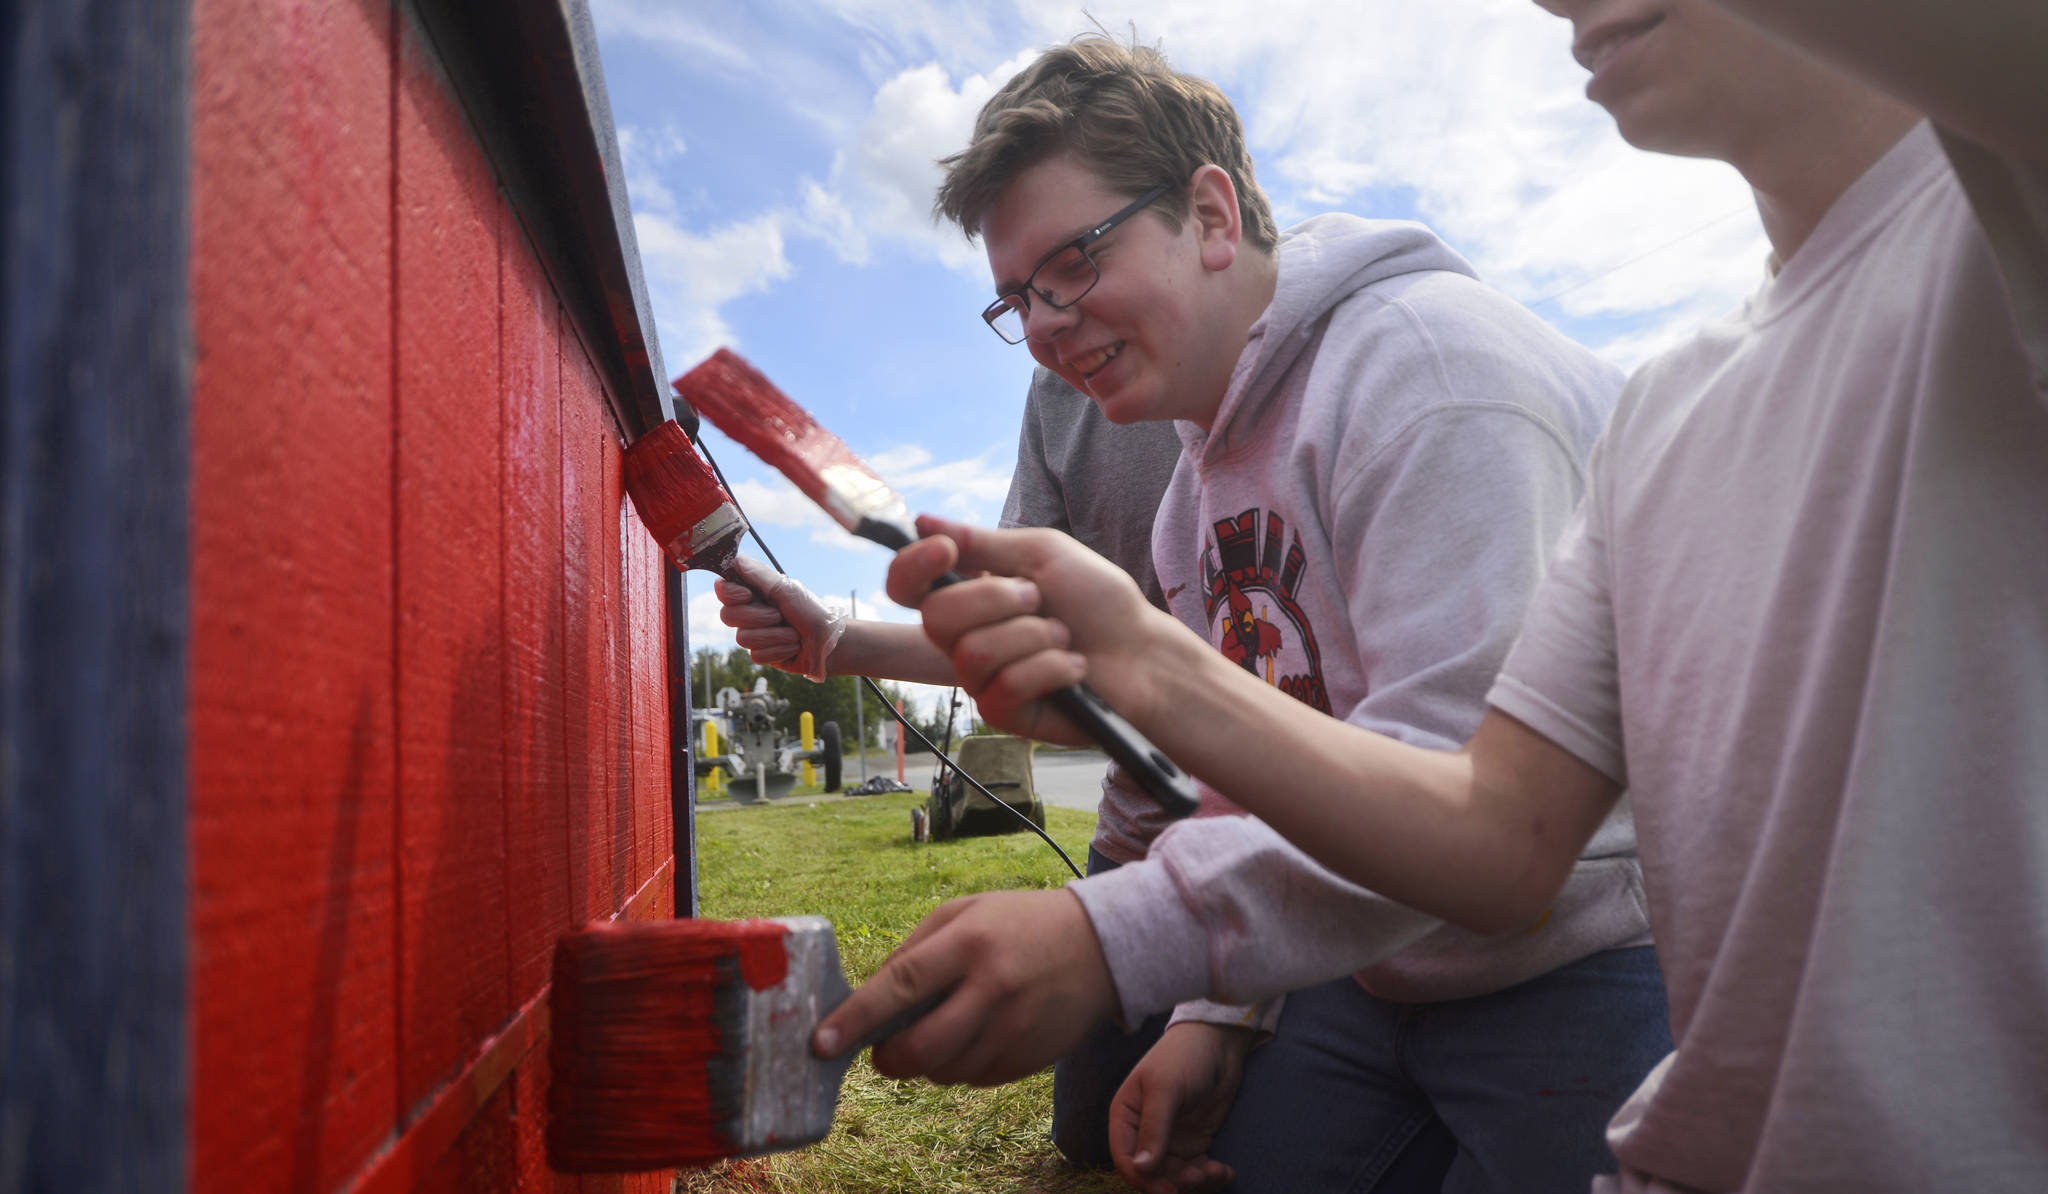 Eagle Scout candidate Derek Brown and fellow members of Kenai’s Boy Scout Troop 152 Joey Freeman (left) and Jimmy Freeman (right) paint the flower box outside Kenai’s American Legion post as part of Brown’s Eagle Scout community service project on Monday, July 10, 2017 in Kenai, Alaska. To earn Boy Scouting’s highest rank, Brown organized the troop, along with friends and family members, in repainting the flower box red, white, and blue, and planting it with a pattern of red, white, and blue flowers, along with purple petunias to symbolize the Purple Heart military decoration given to wounded soldiers. Brown, who began planning the project about two weeks ago, said his two brothers had previously done Eagle Scout projects to benefit schools and churches. “I wanted to do something for the veterans, and this was the best I could come up with,” Brown said.